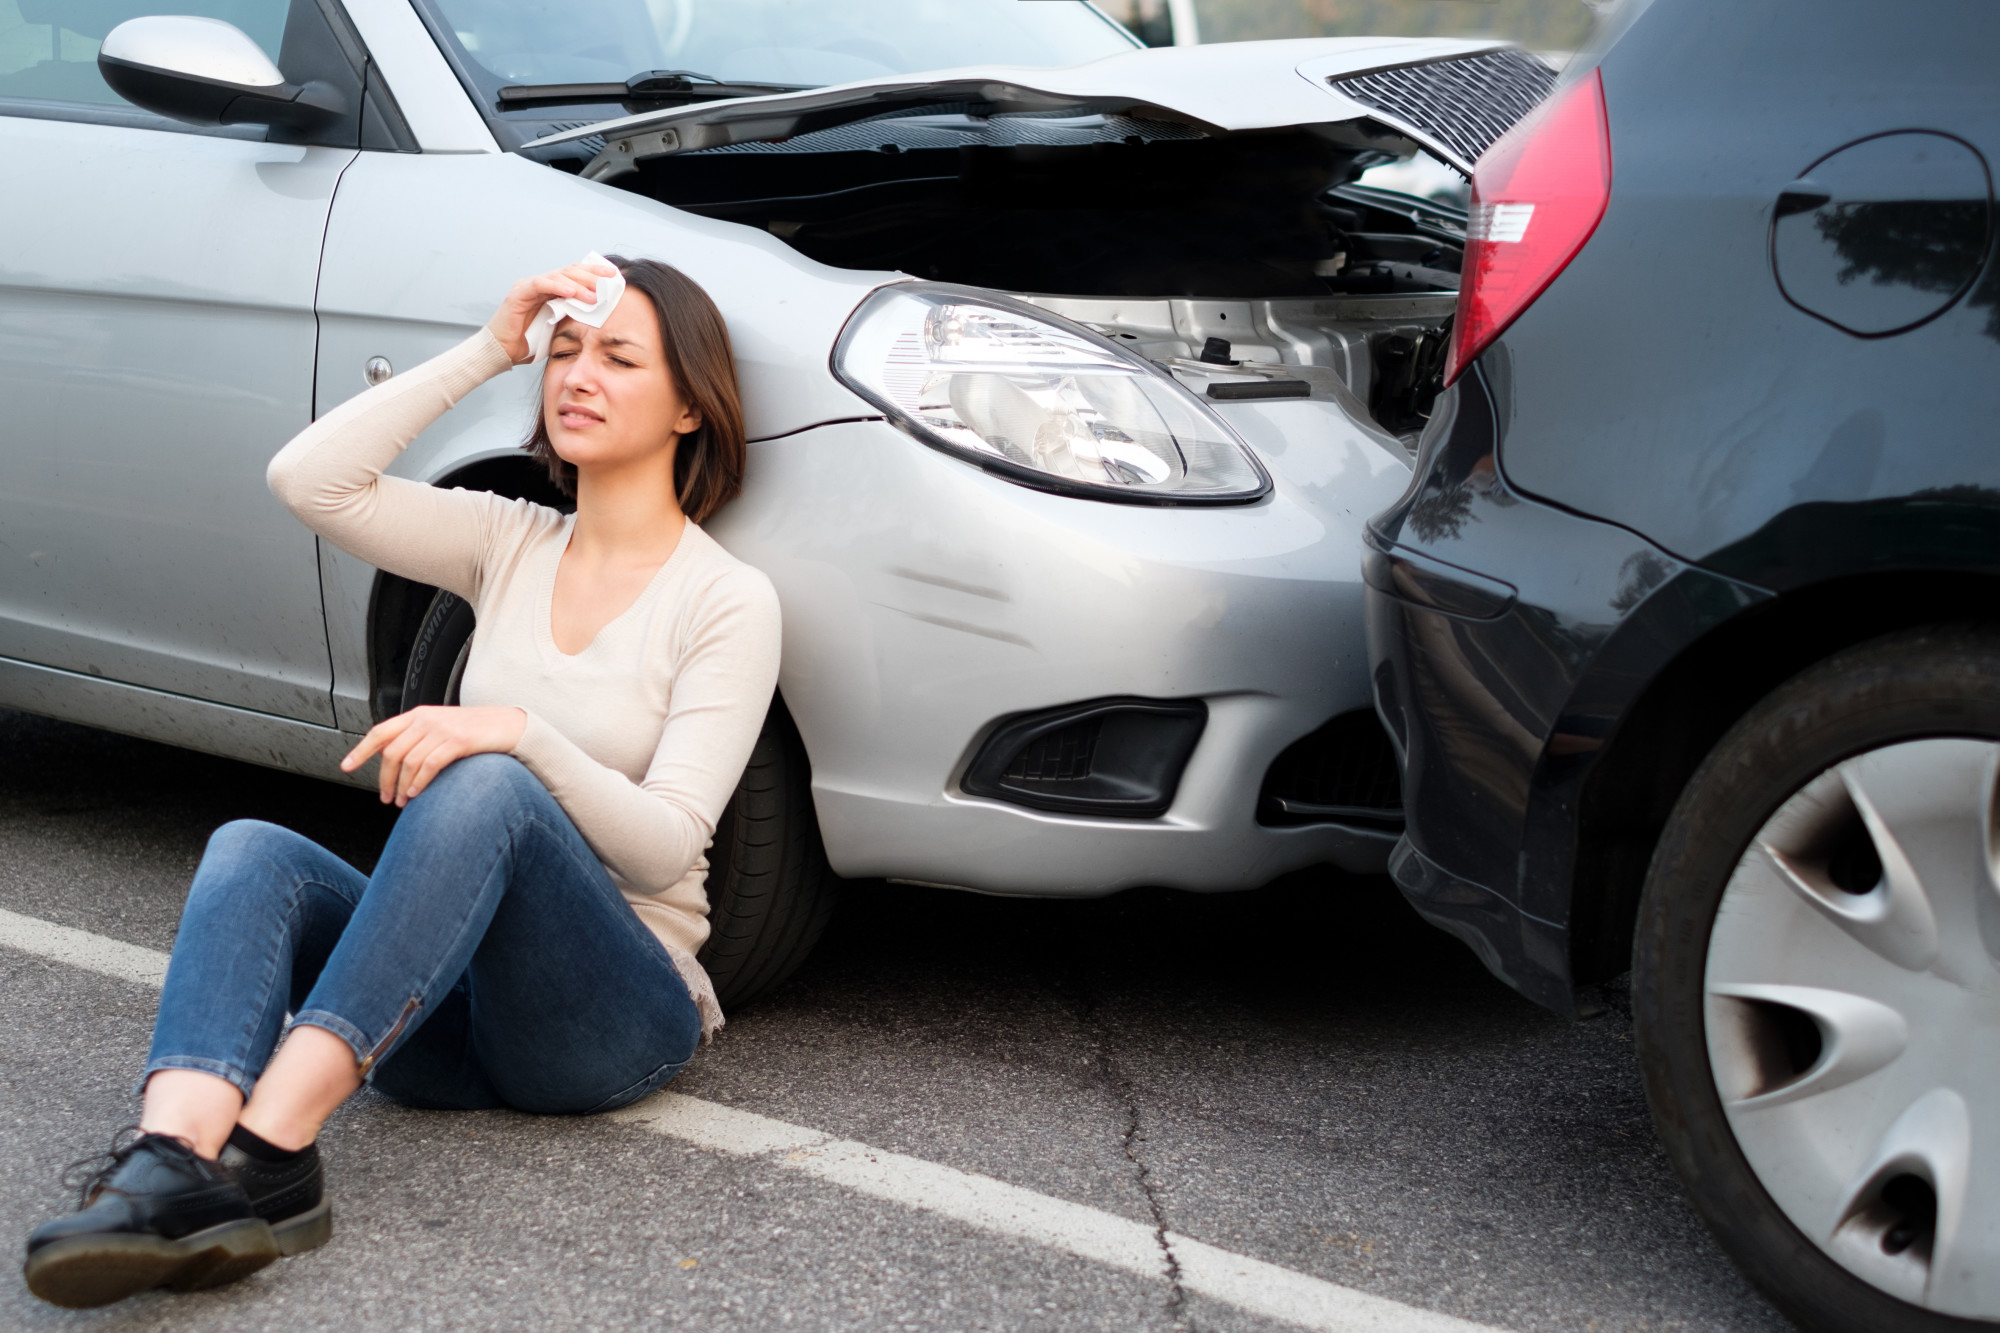  Car Accident Lawyer